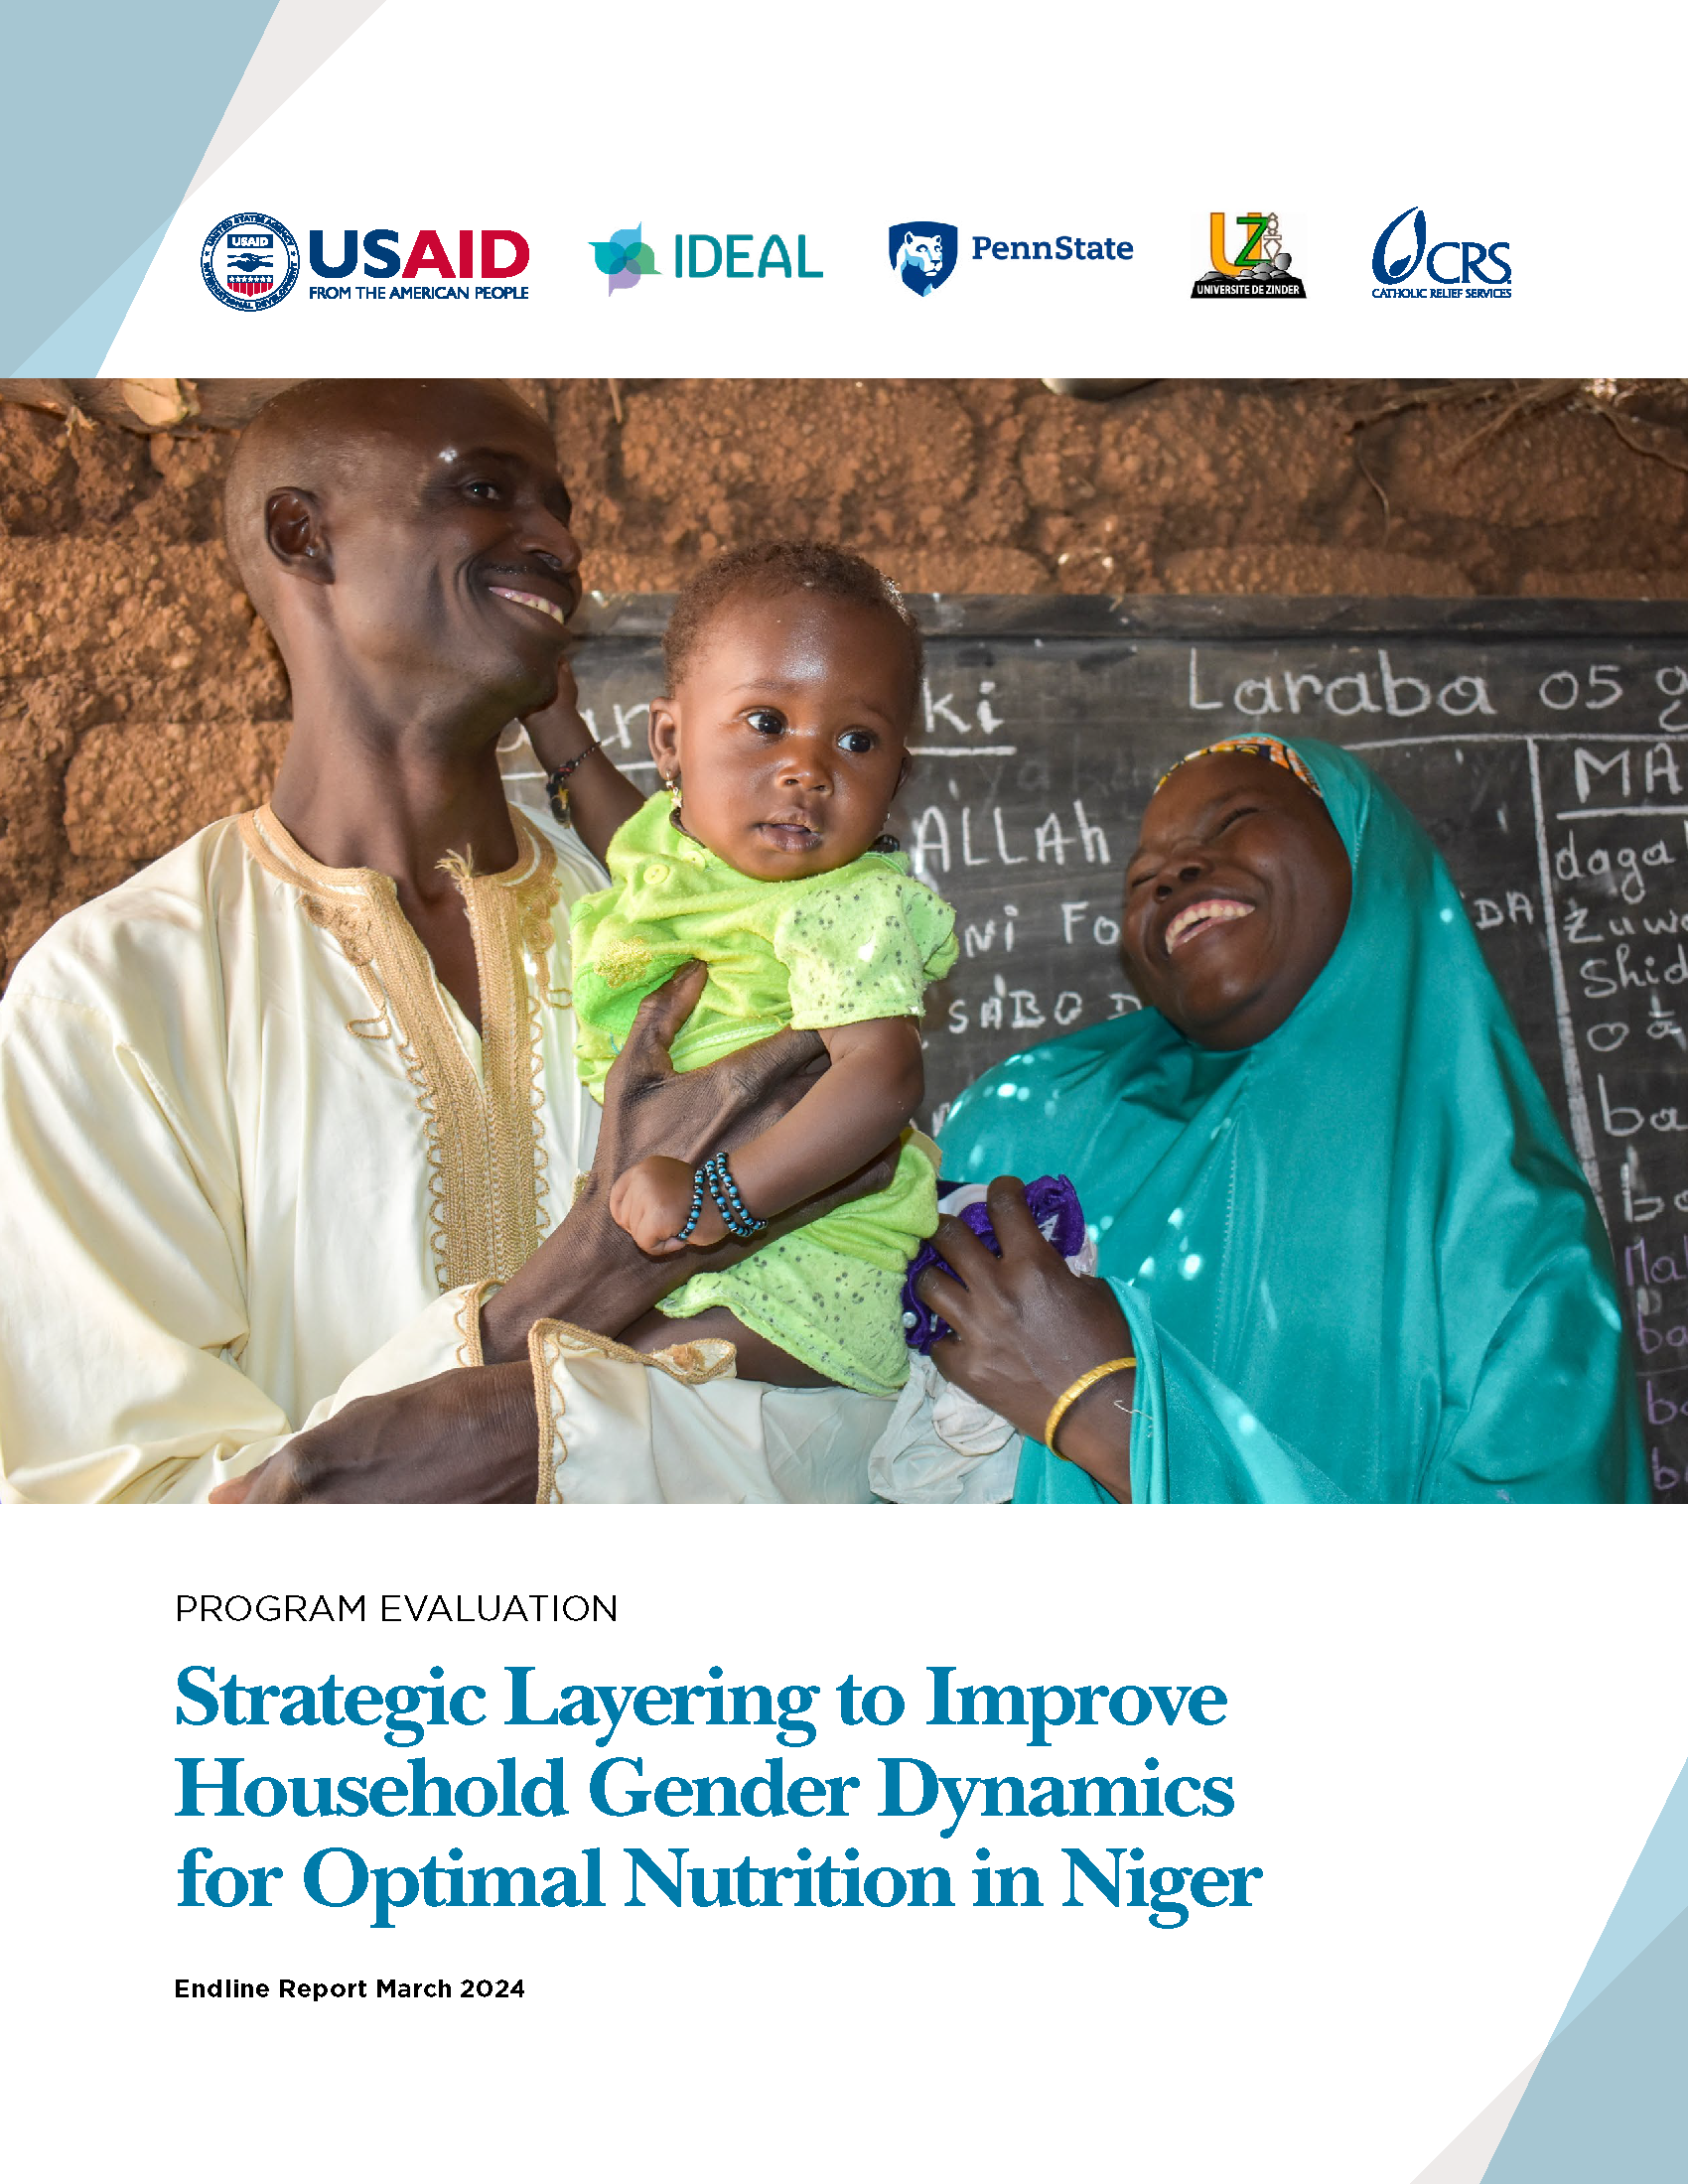 Cover page for Strategic Layering to Improve Household Gender Dynamics for Optimal Nutrition in Niger